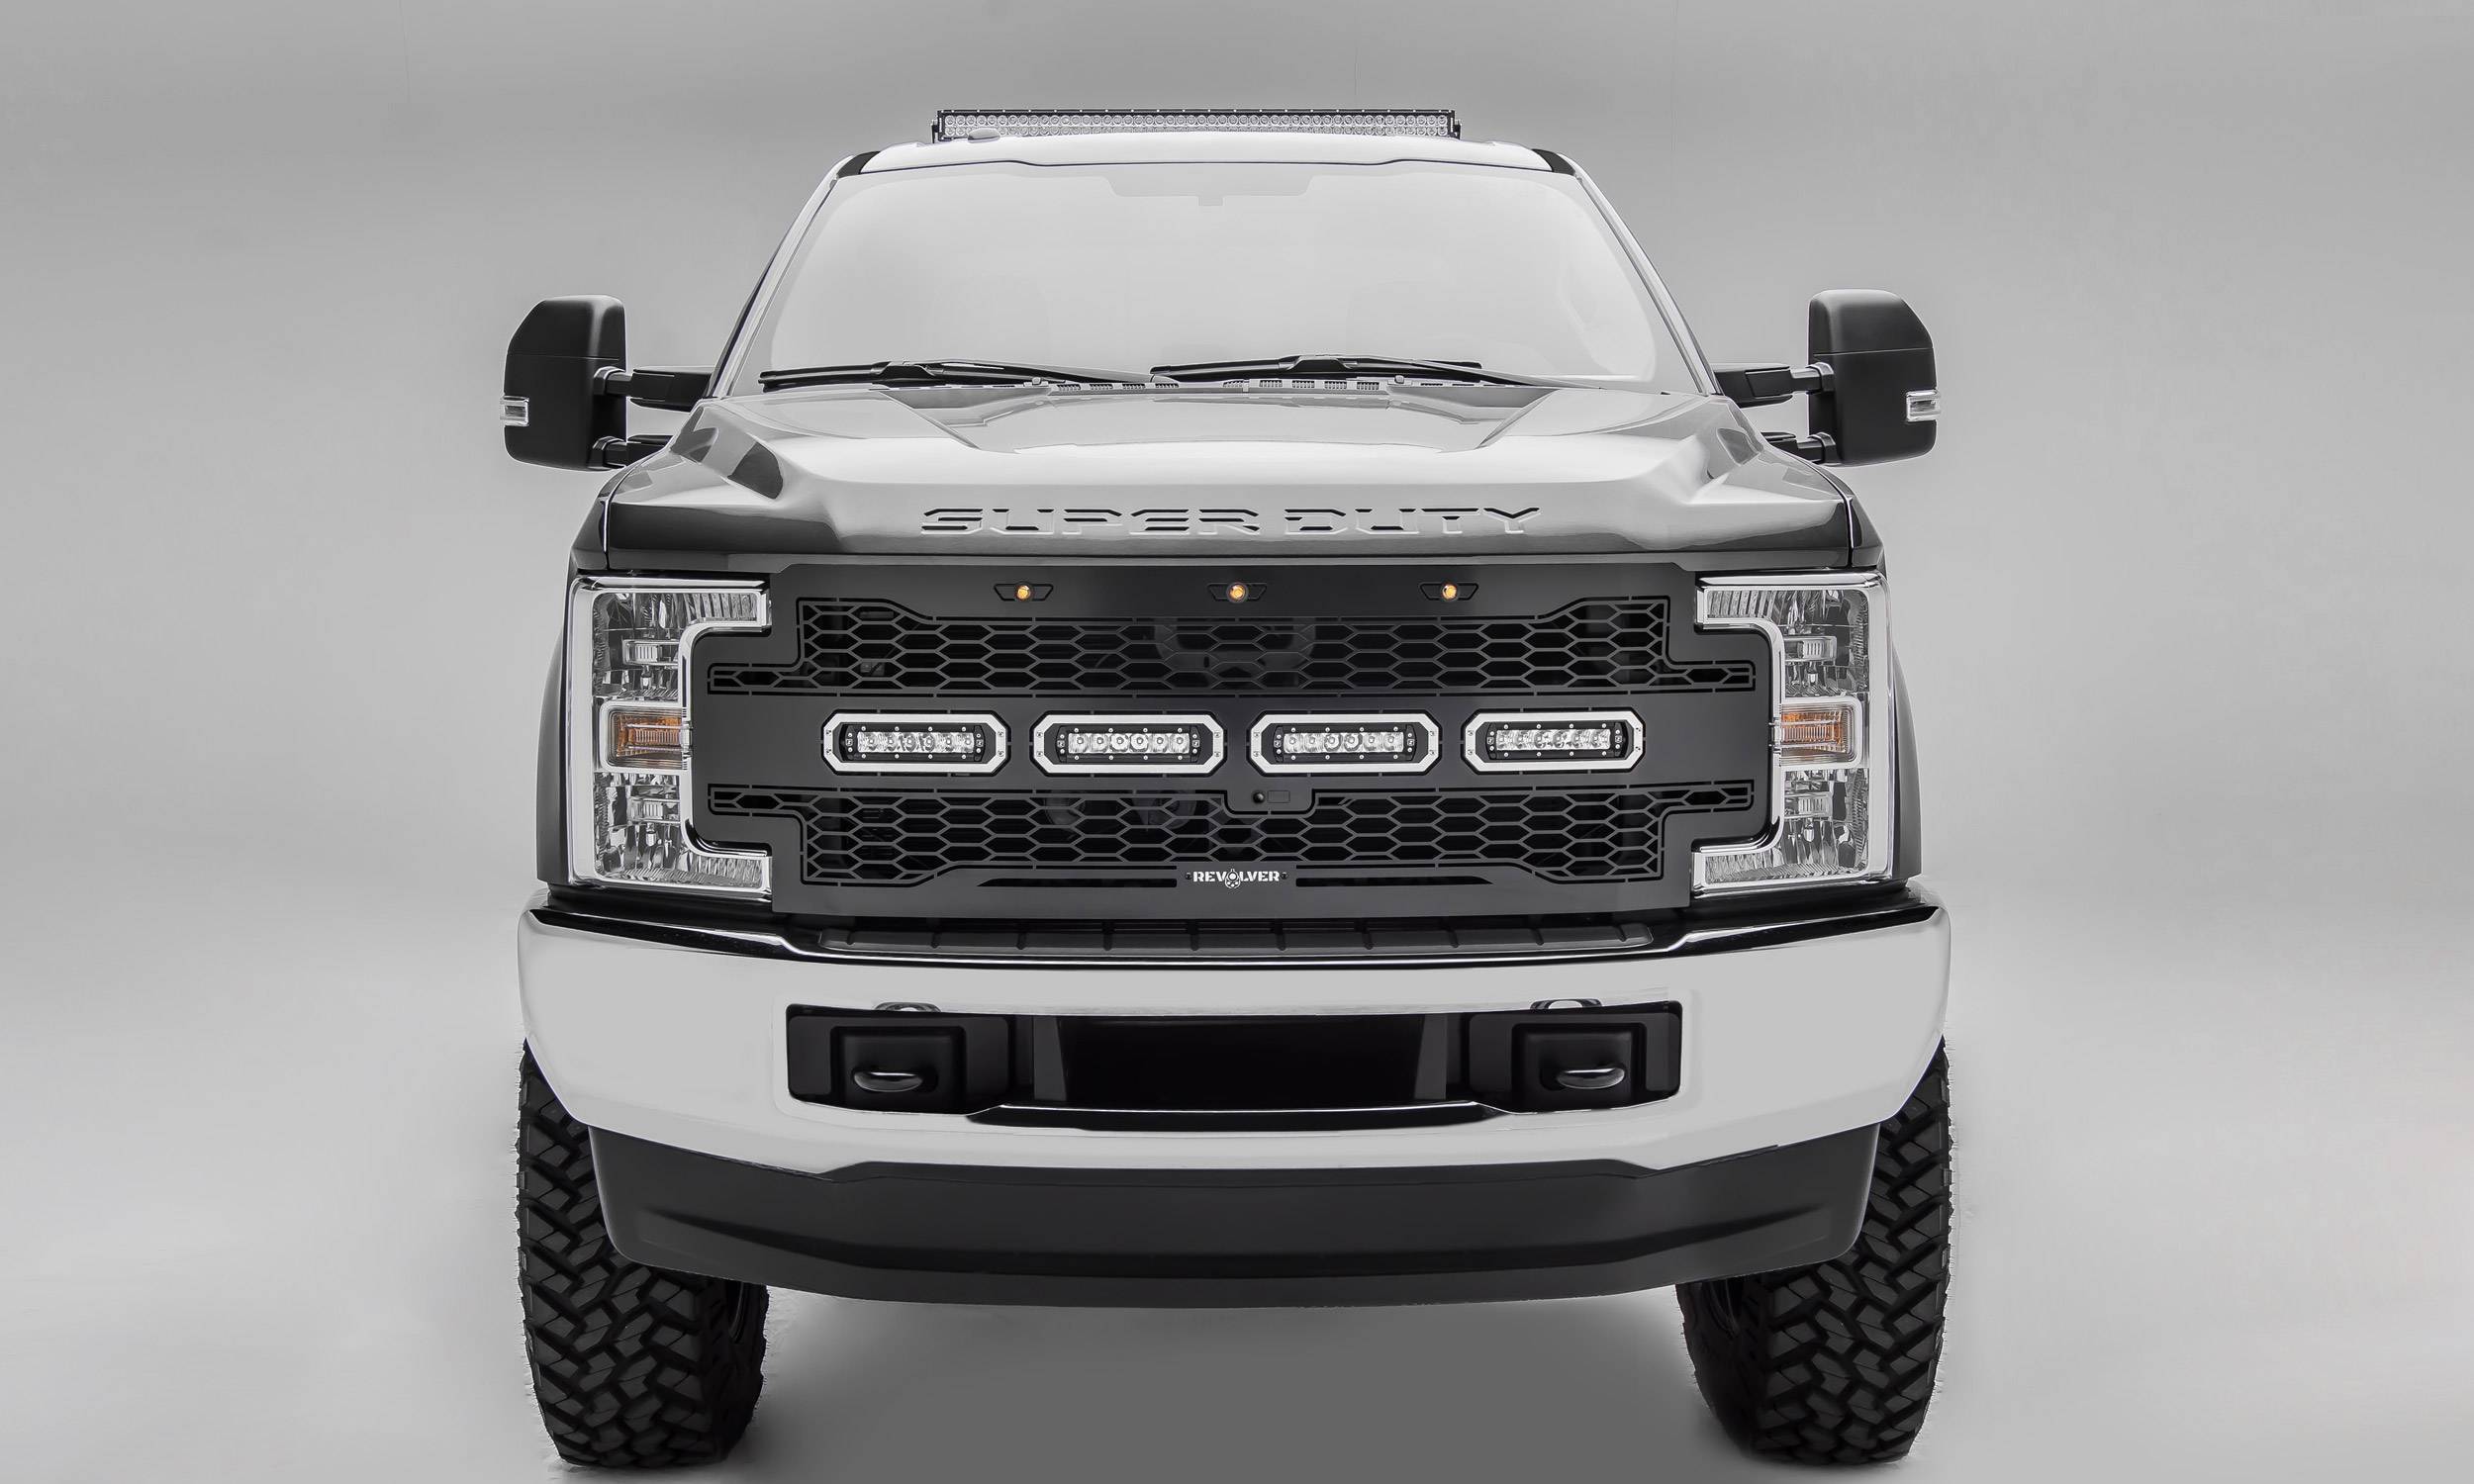 T-REX Grilles - 2017-2019 Super Duty Revolver Grille, Black, 1 Pc, Replacement with (4) 6" LEDs, Fits Vehicles with Camera - PN #6515631